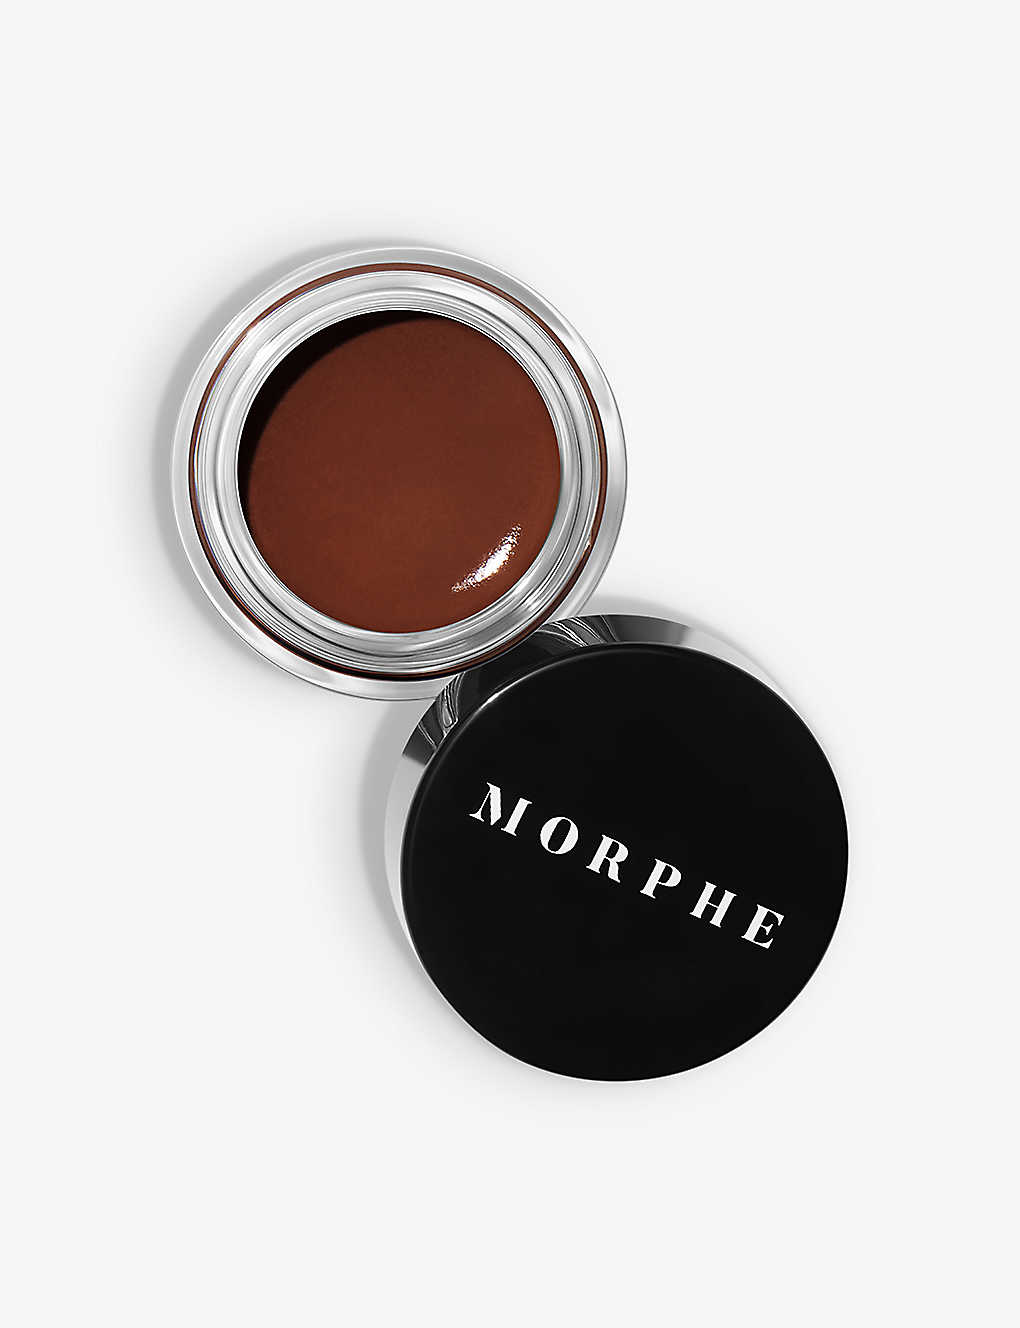 Morphe Almond Supreme Brow Sculpting And Shaping Wax 6.2g